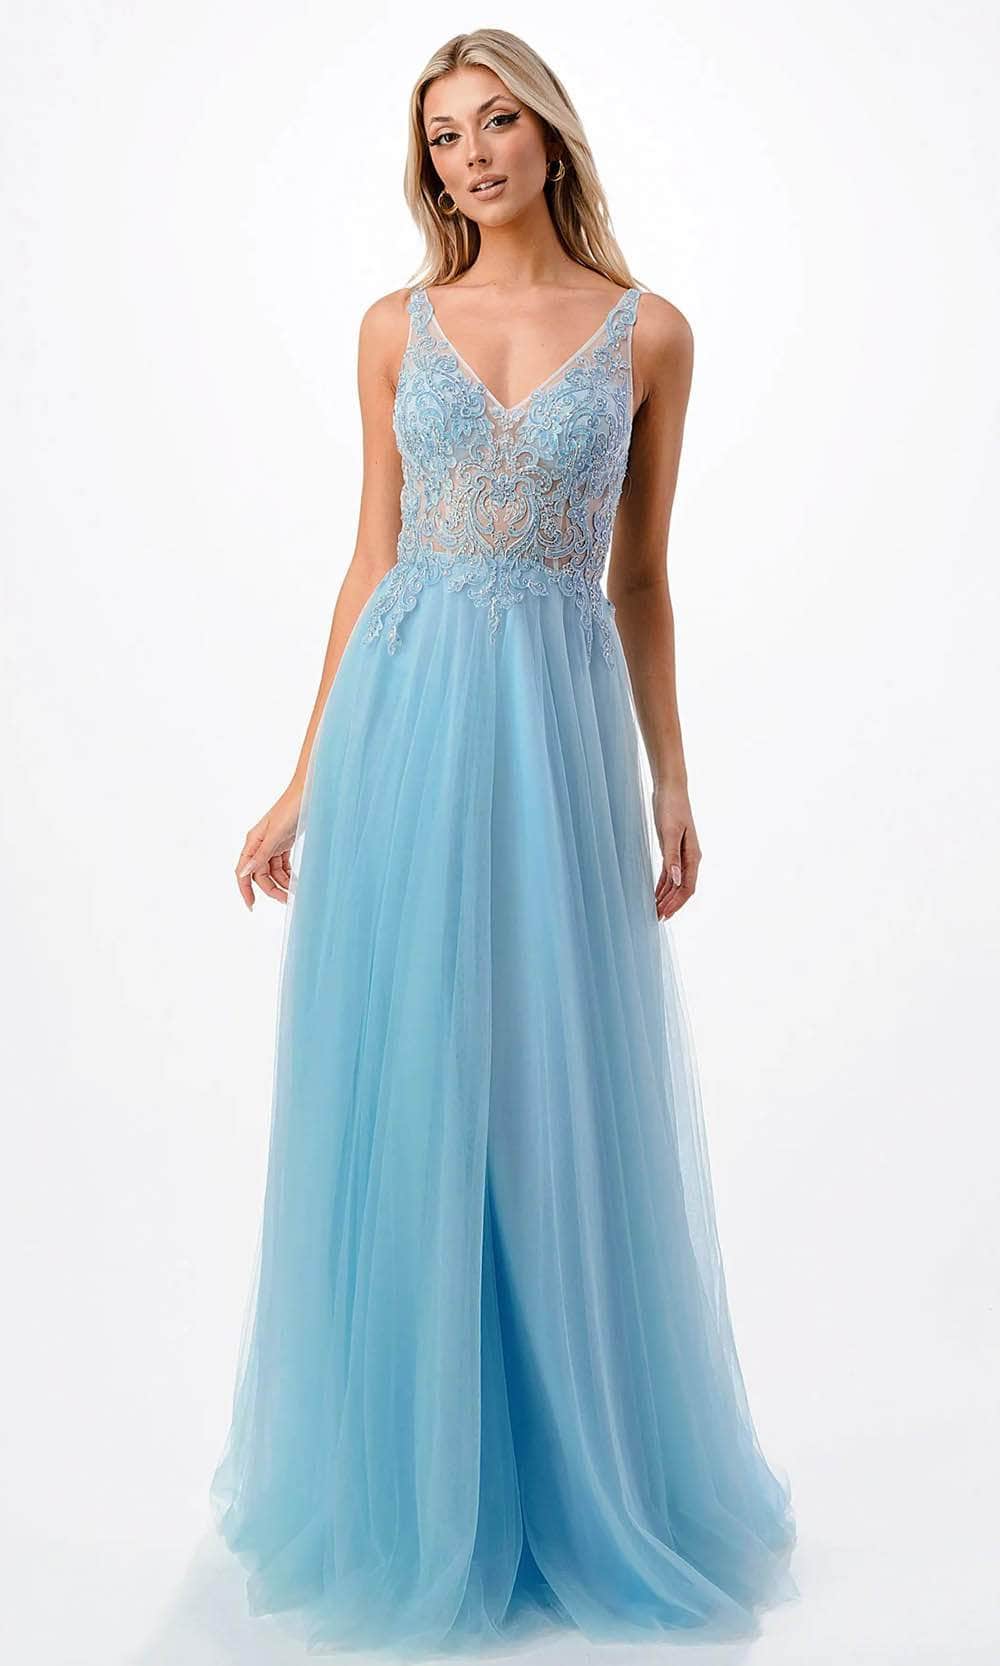 Image of Aspeed Design P2108 - Illusion Embroidered Prom Dress